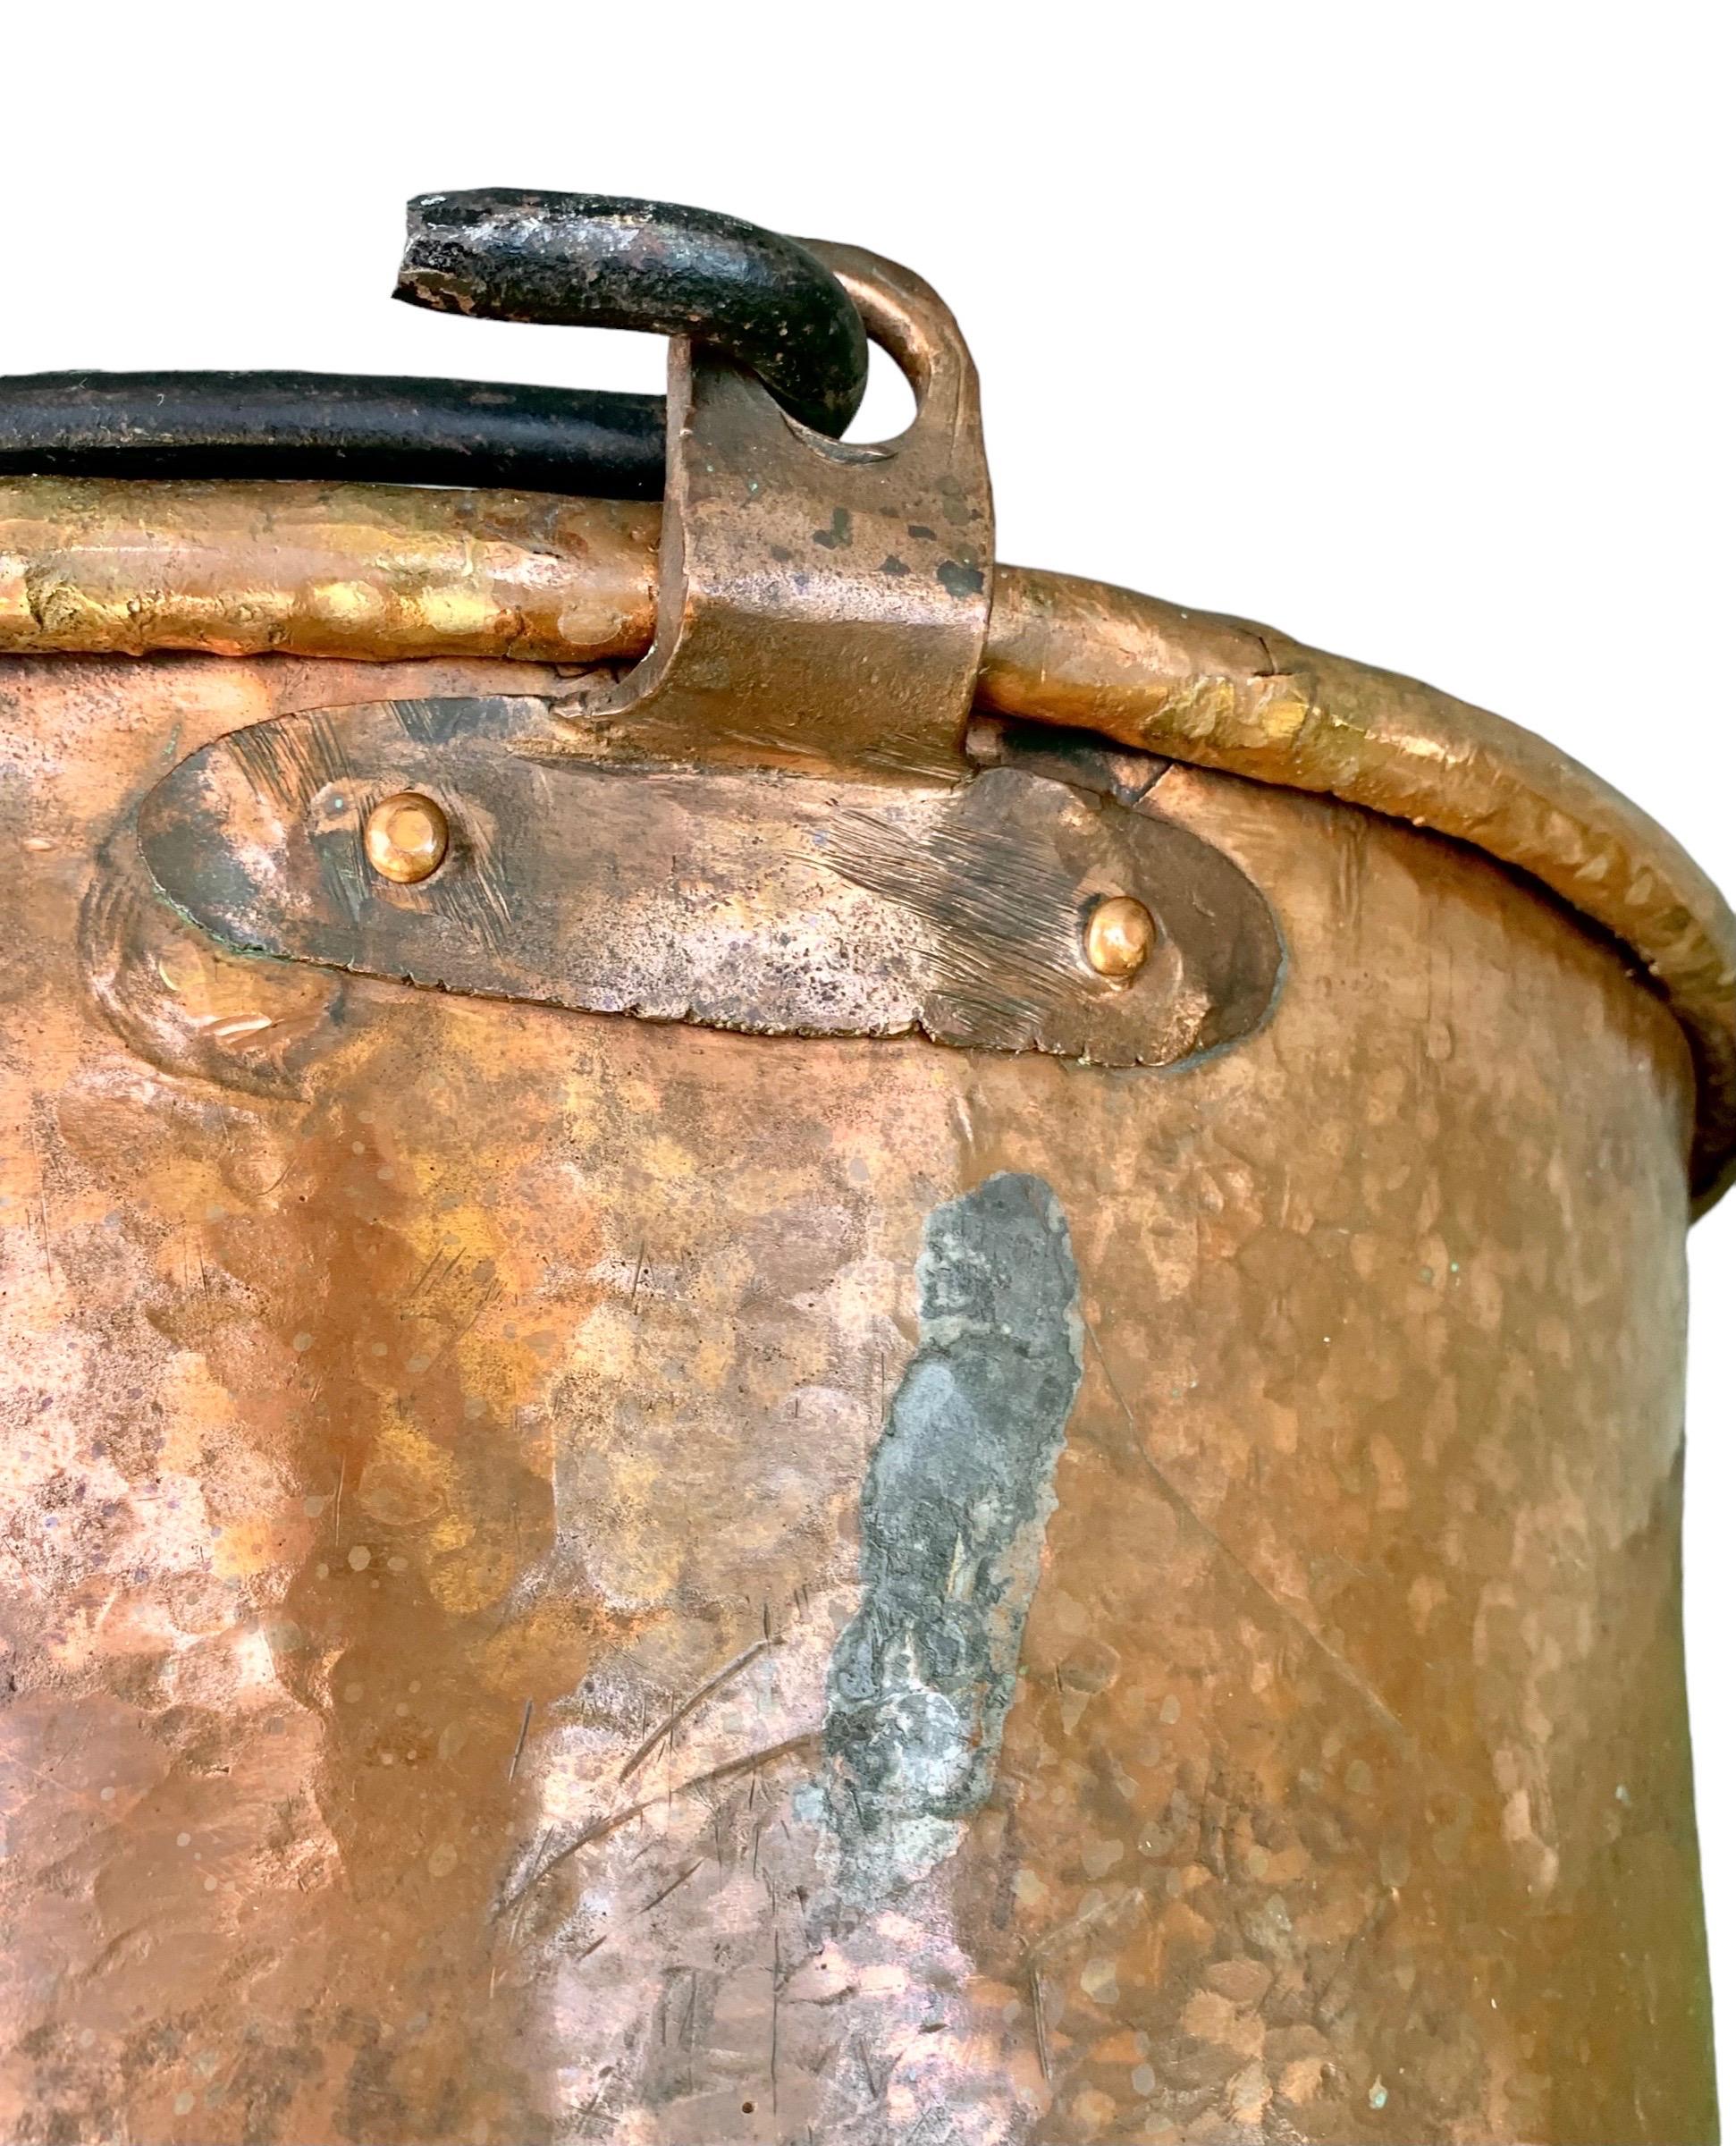 Early 19th Century French Hammered Copper Kettle with Iron Handle 2